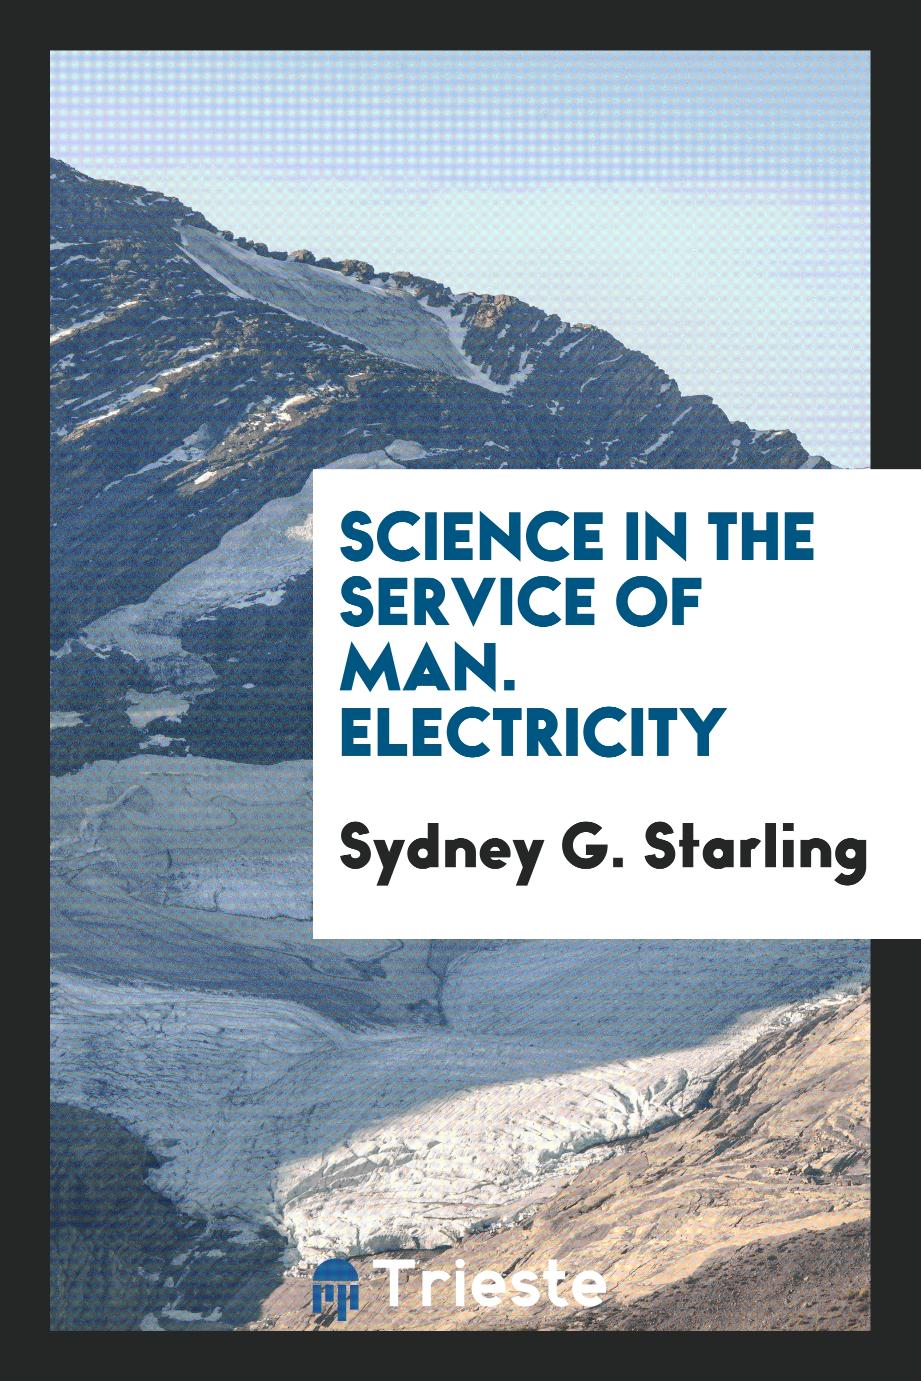 Sydney G. Starling - Science in the Service of Man. Electricity